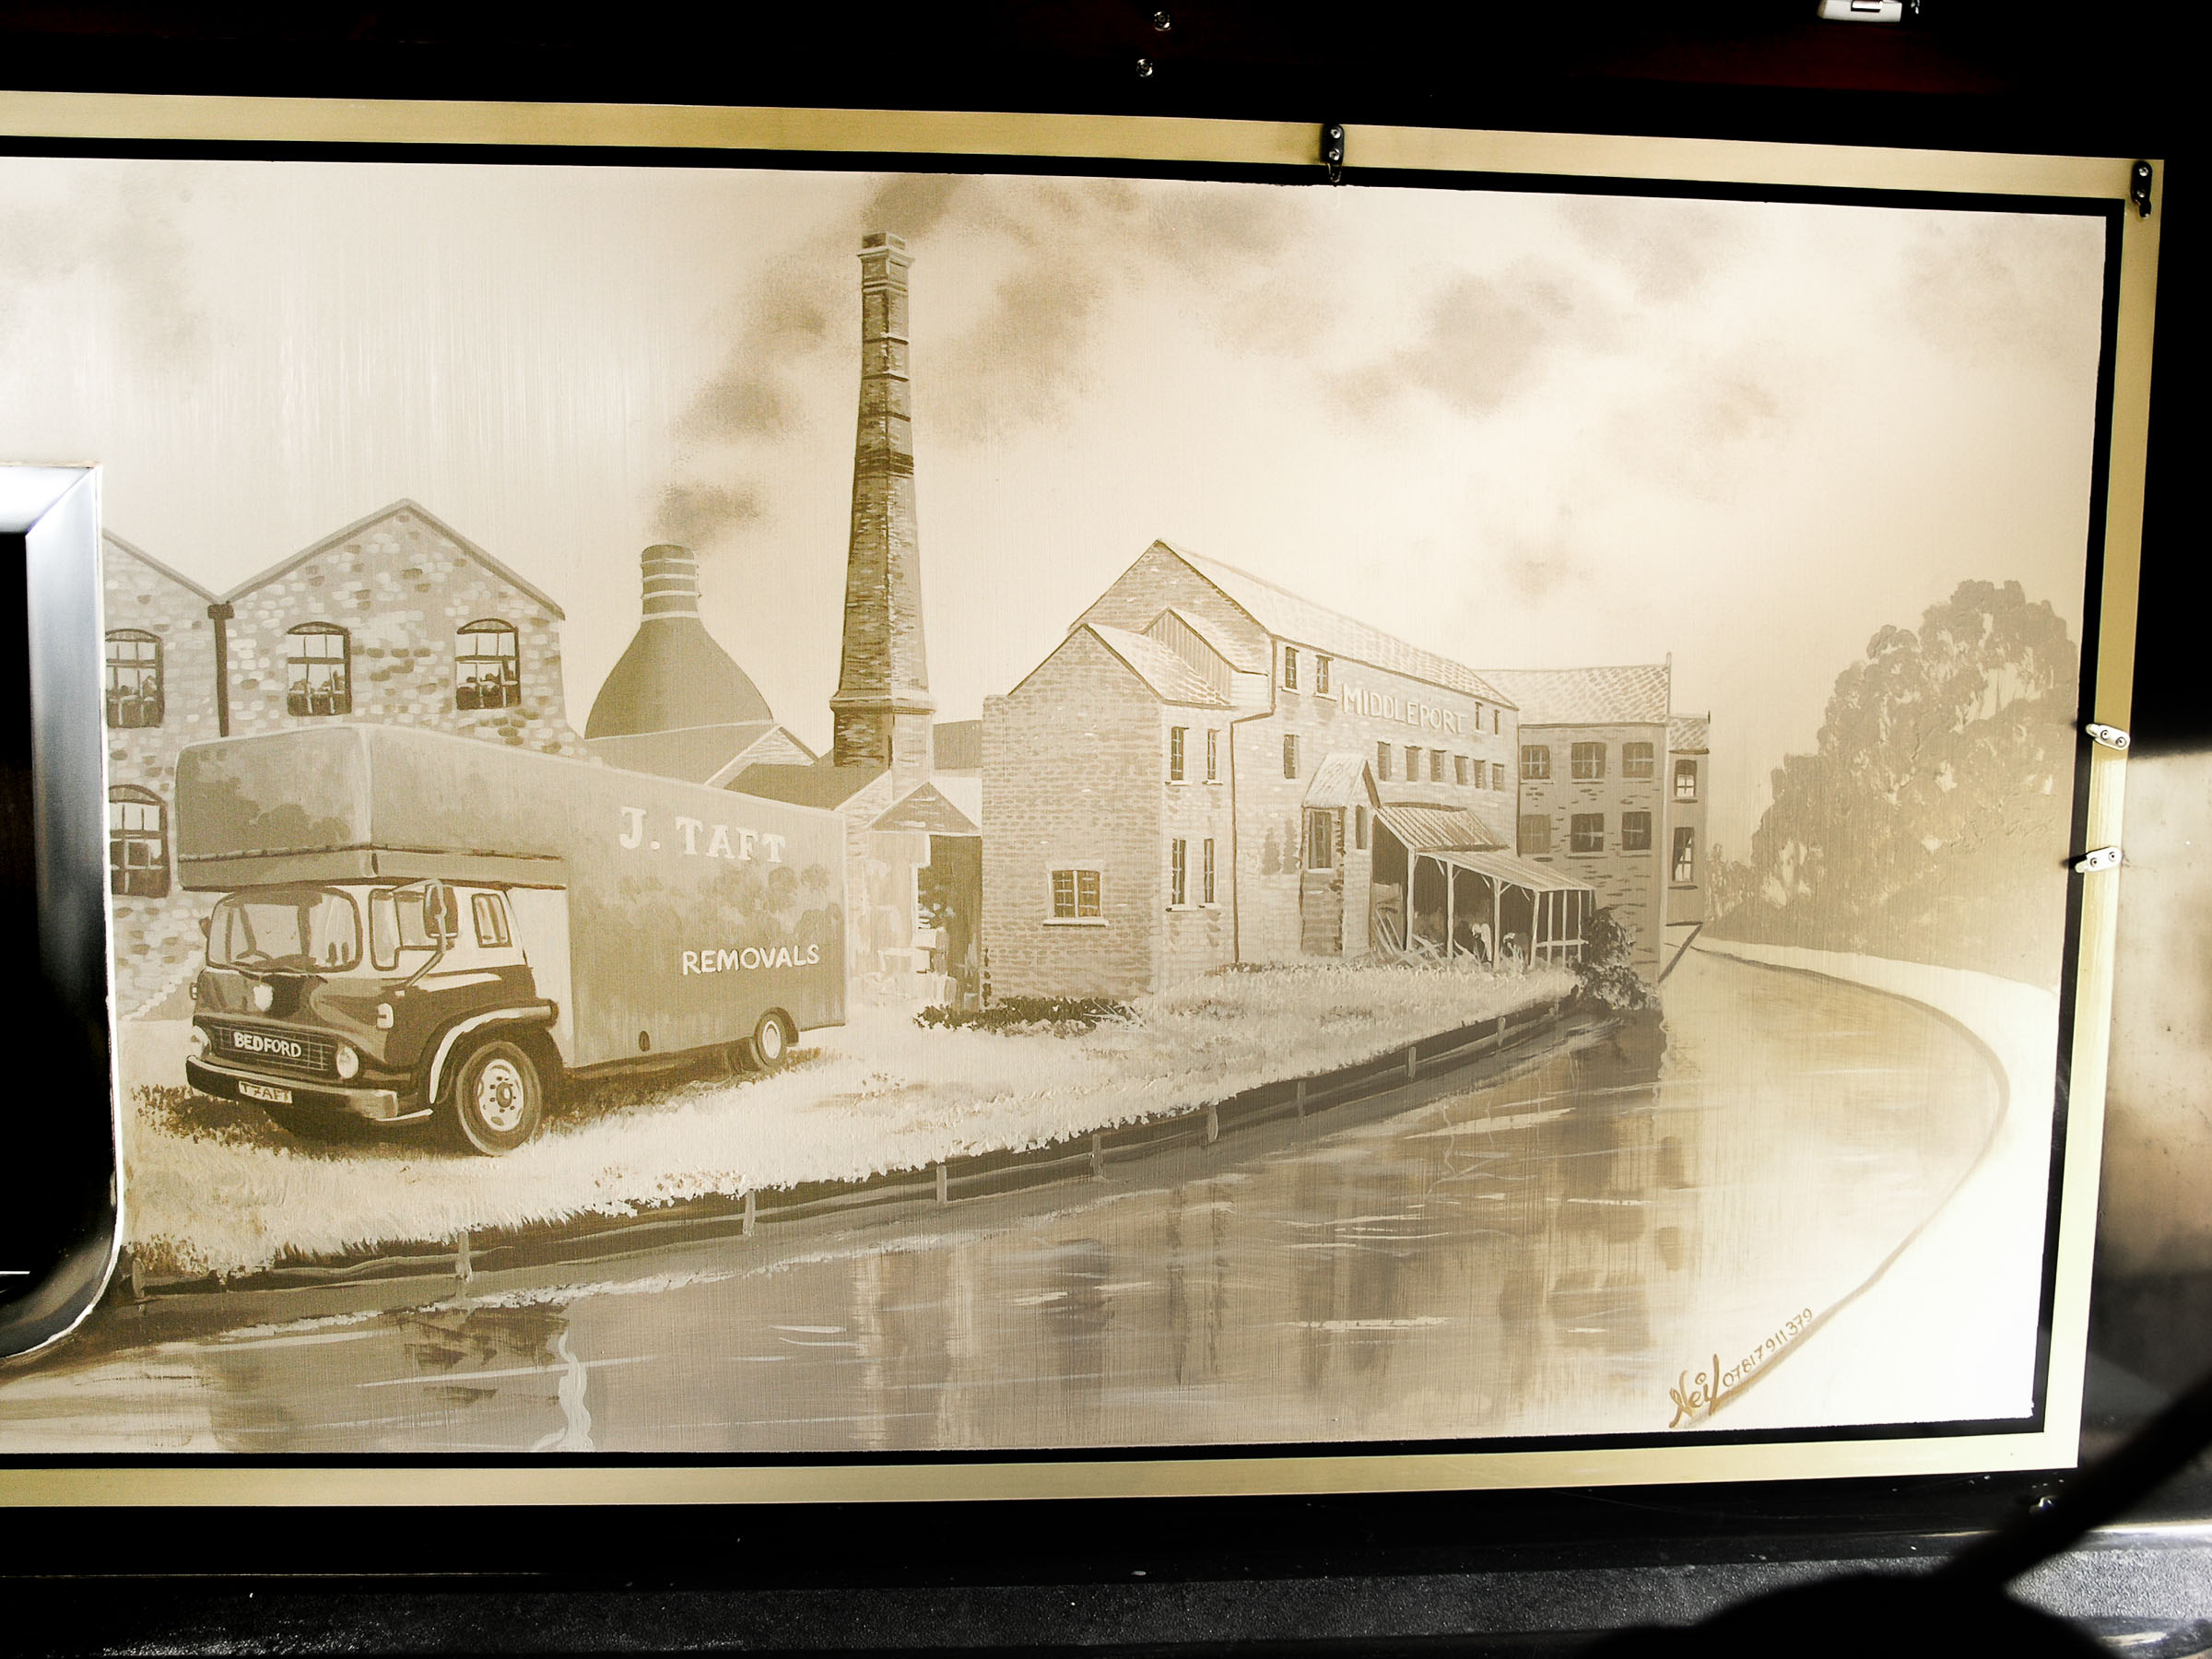 Mural panel depicts Middleport Pottery, here captured in the 60s, and now featuring on the BBC's "Great Pottery Throwdown"